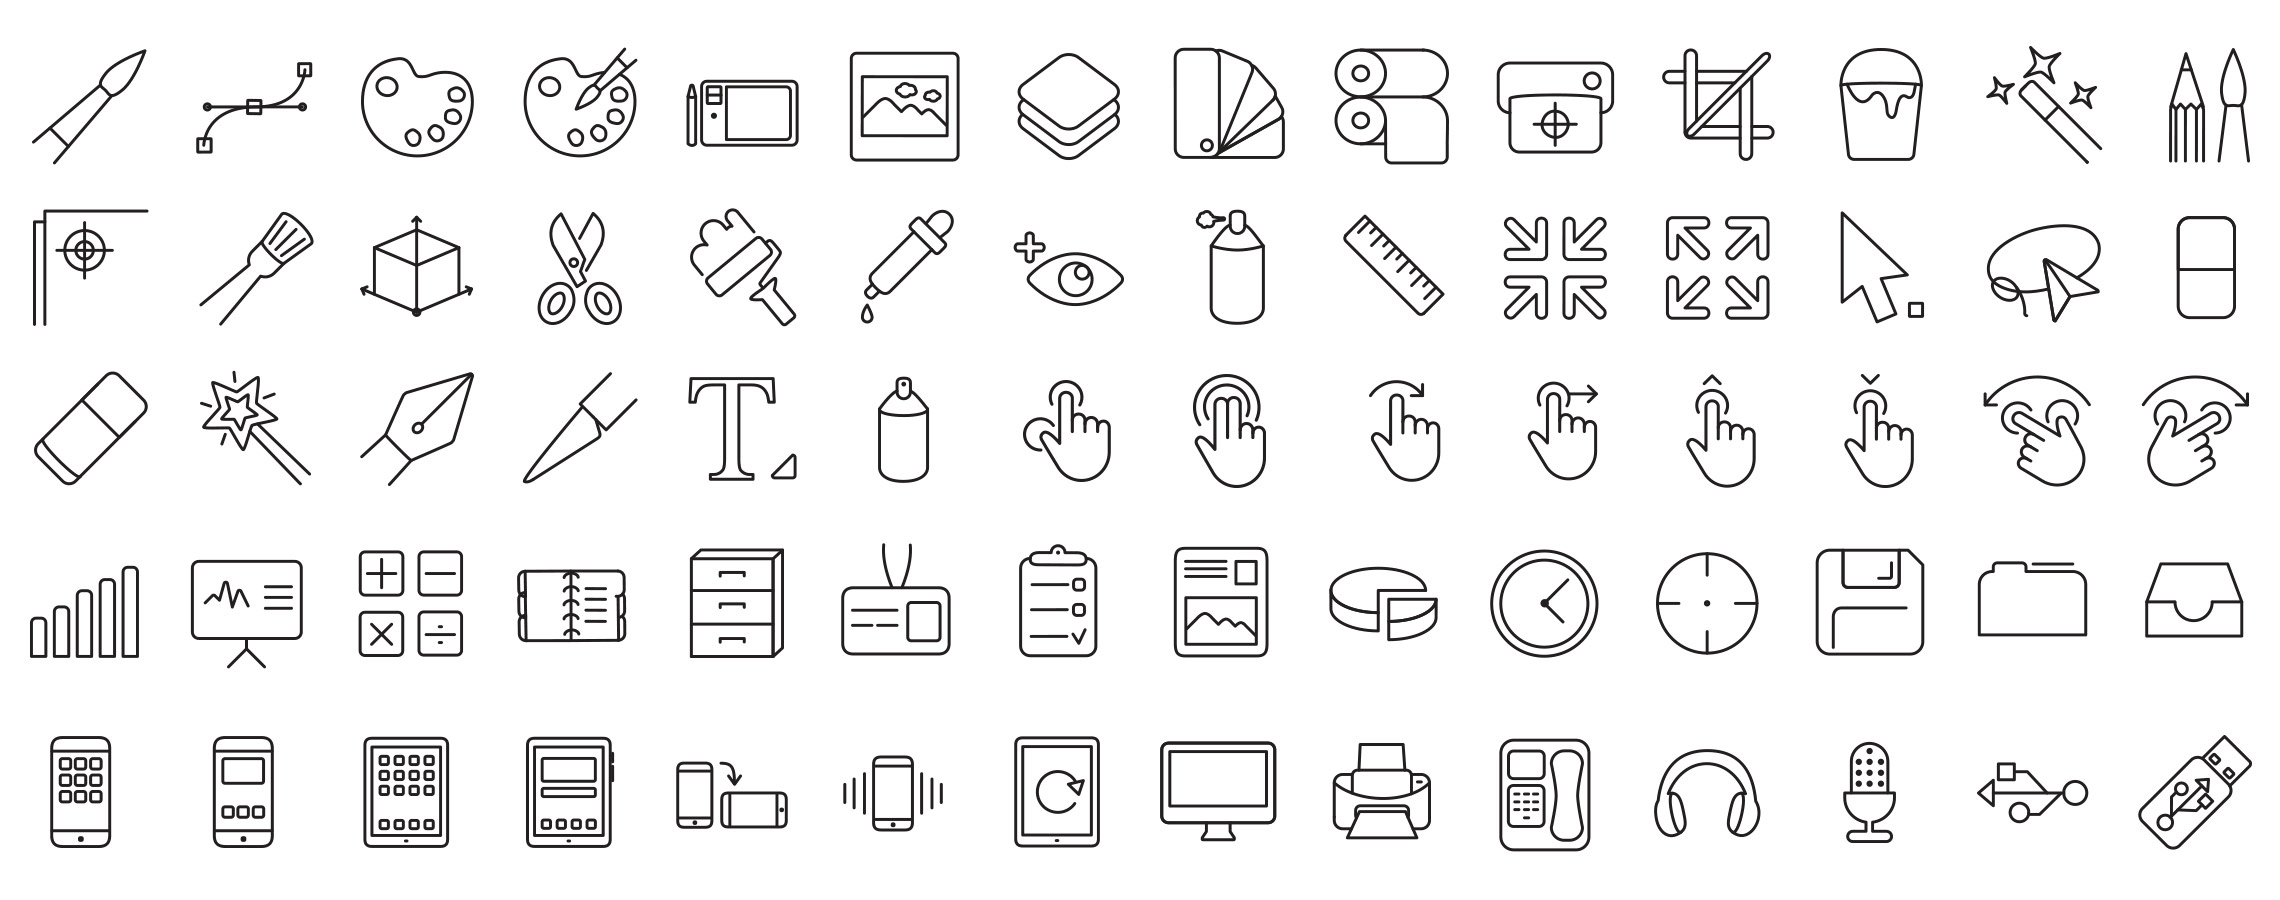 16,500 Icons the biggest vector bundle for websites and applications.